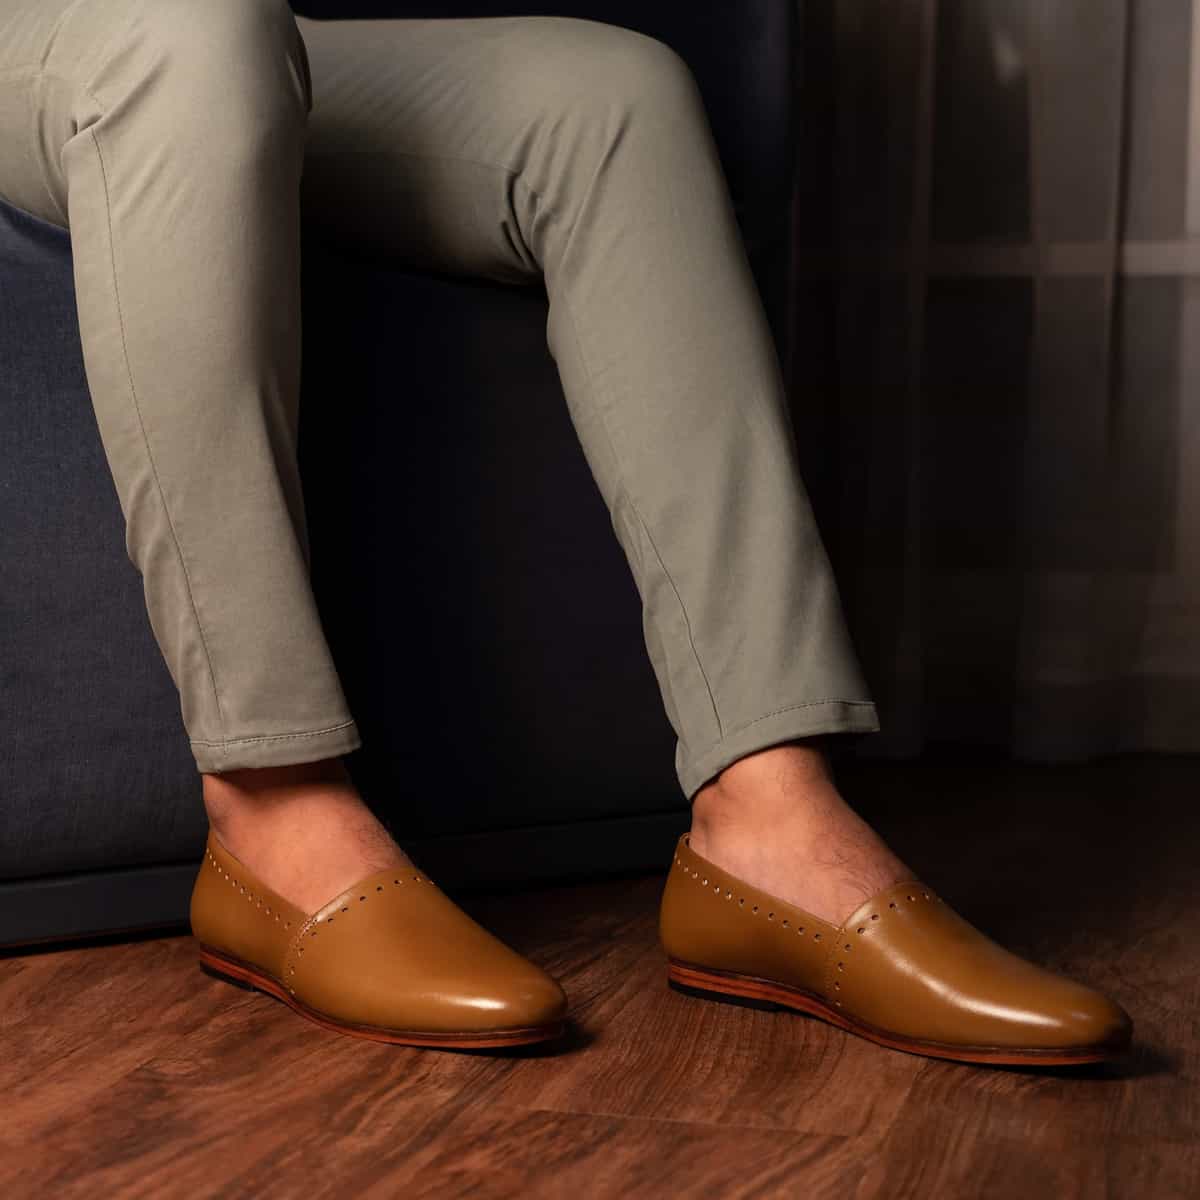 Mule Style Loafer Image